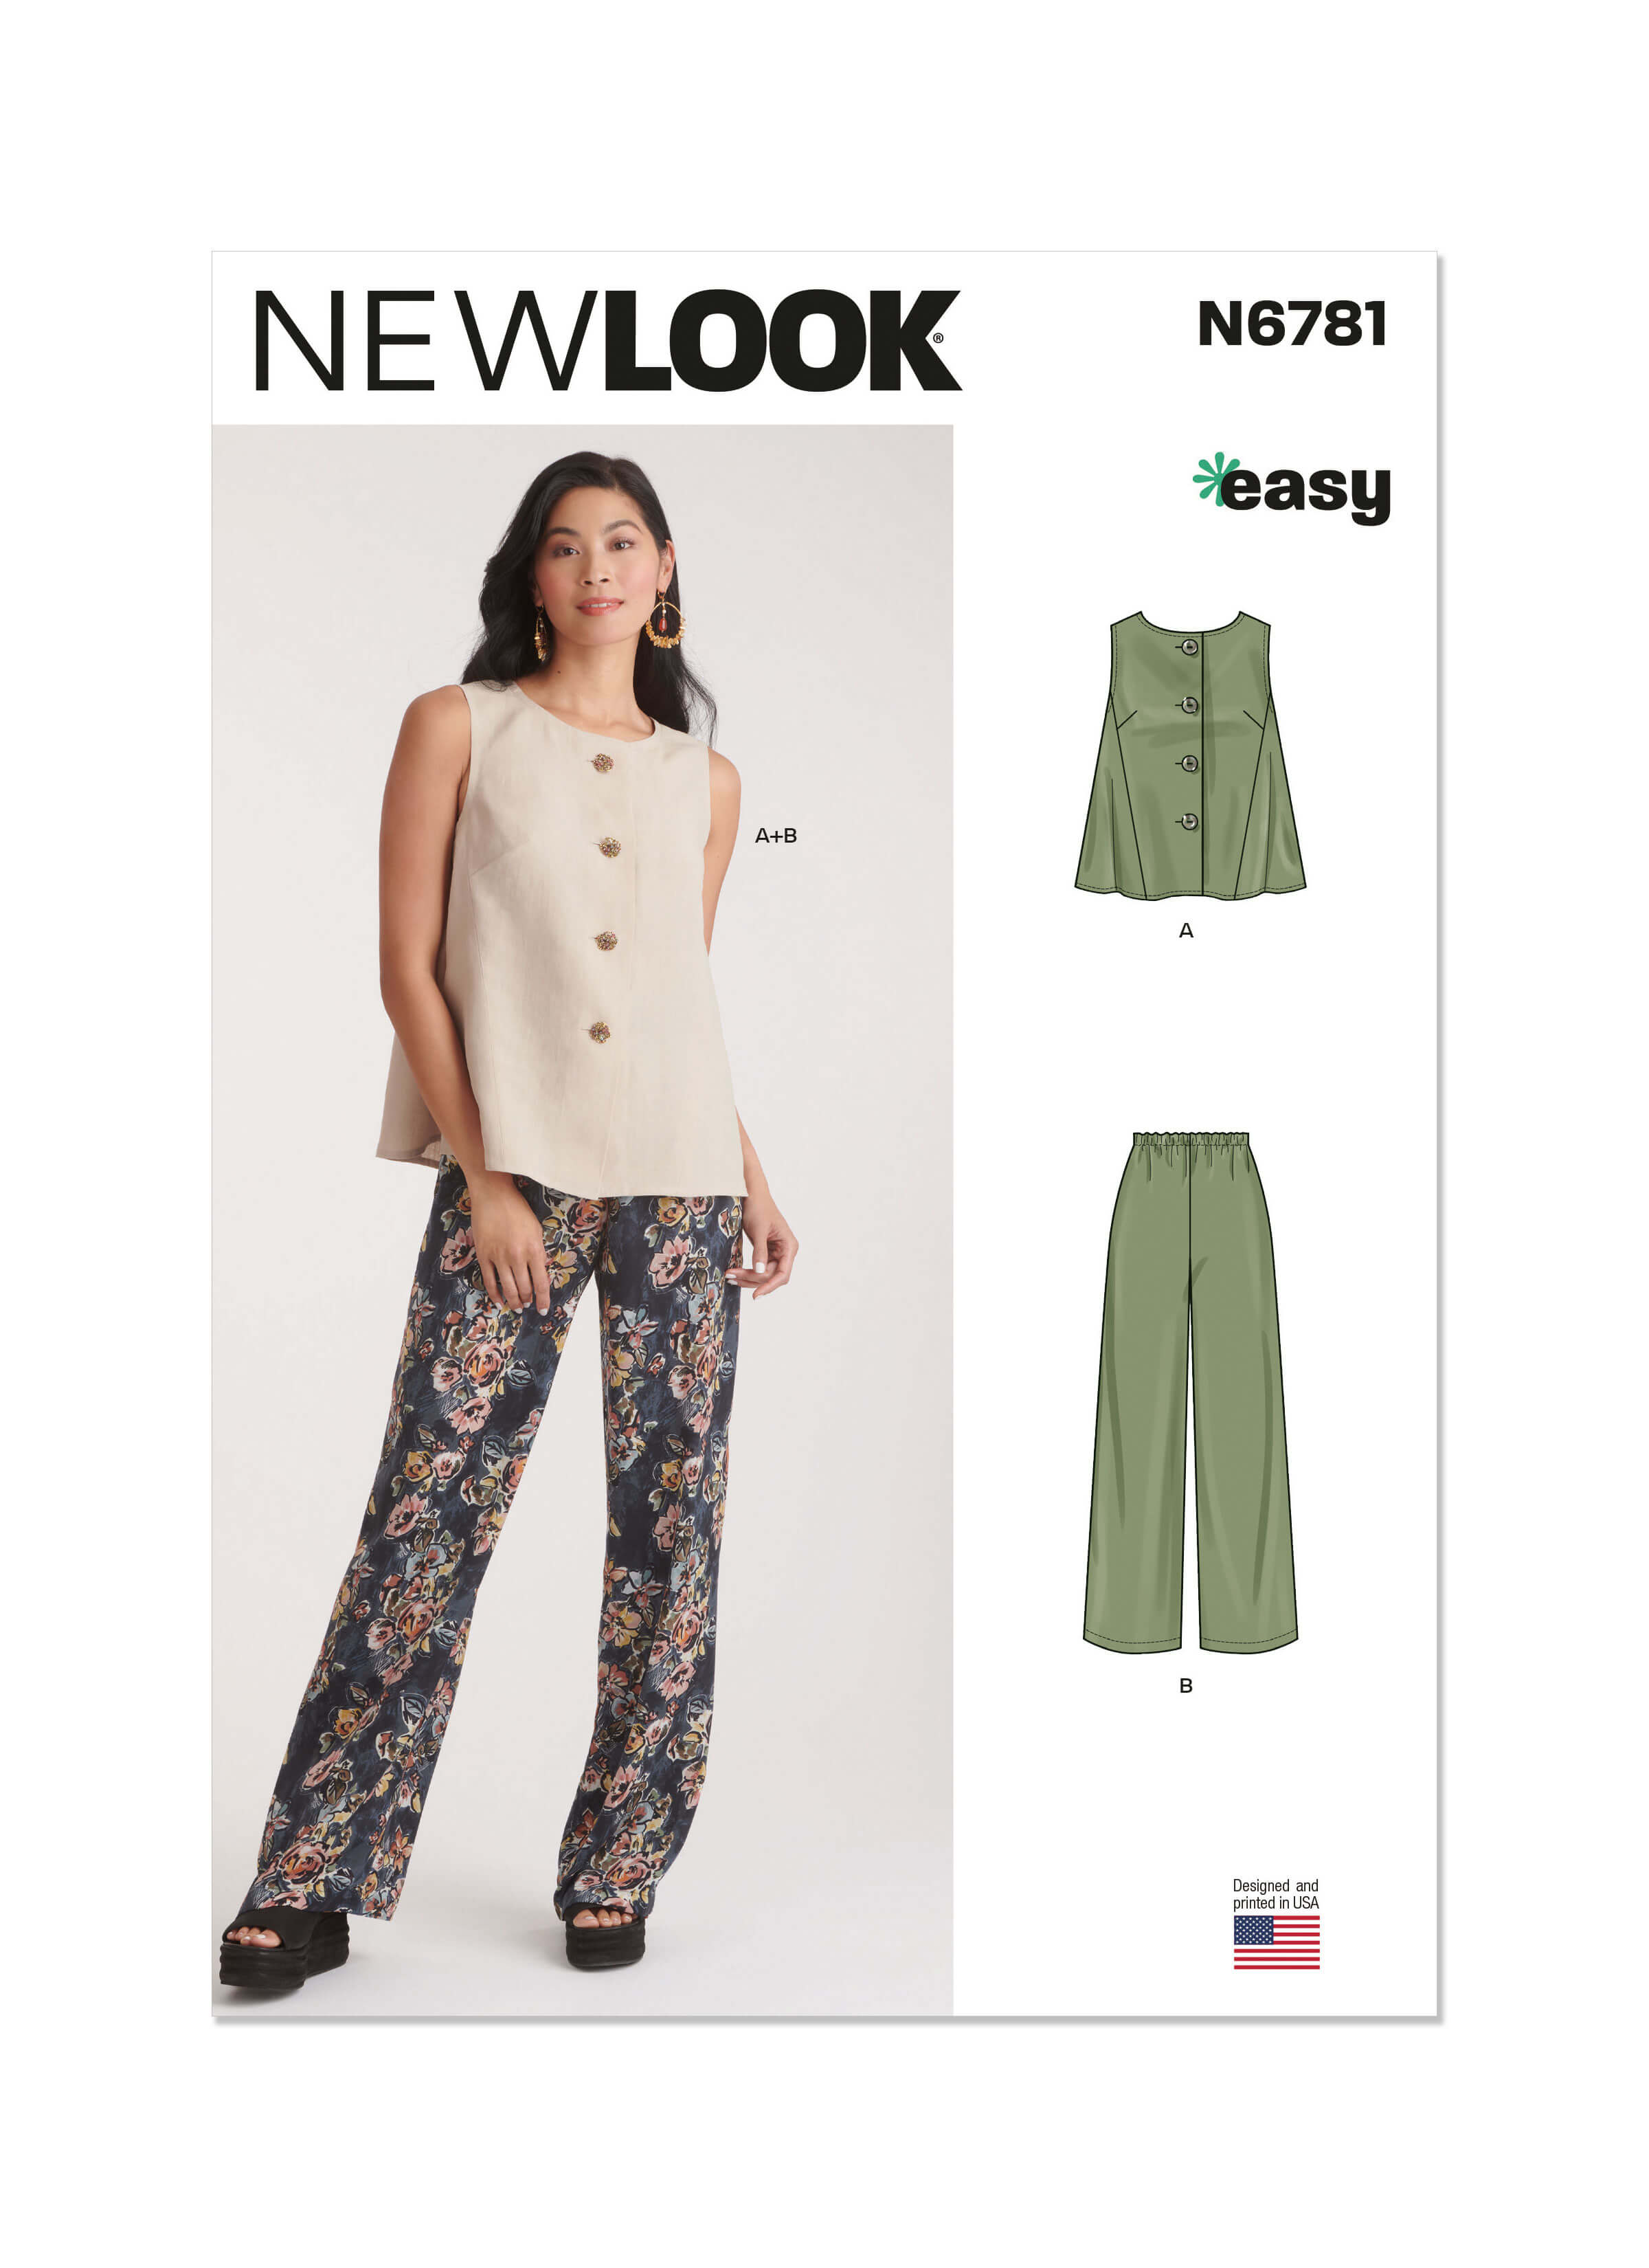 New Look Sewing Pattern N6781 Misses' Top and Trousers